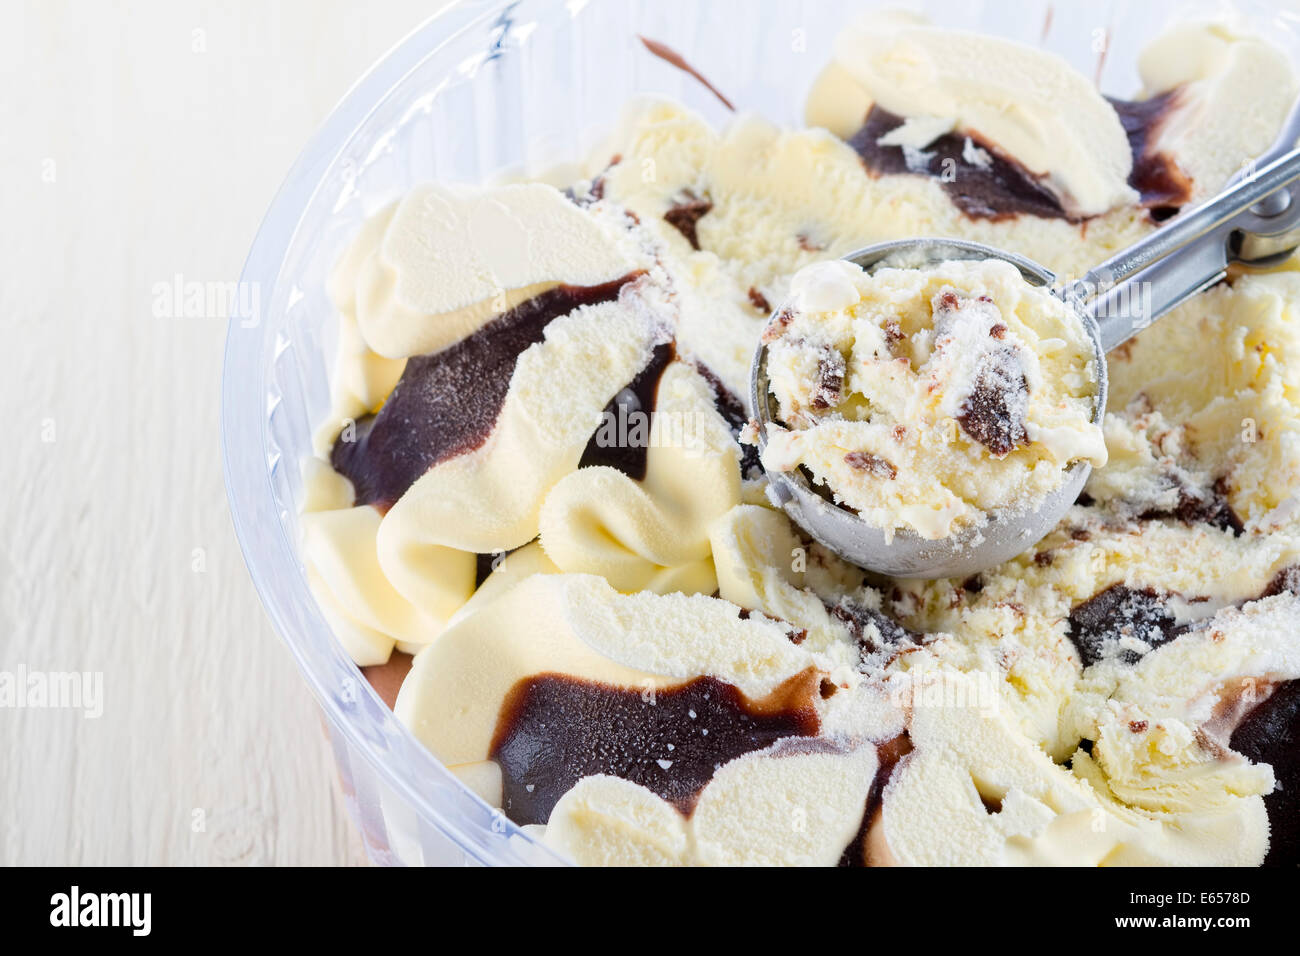 vanilla with chocolate ice cream scoop scooped out of a container on white wooden background Stock Photo